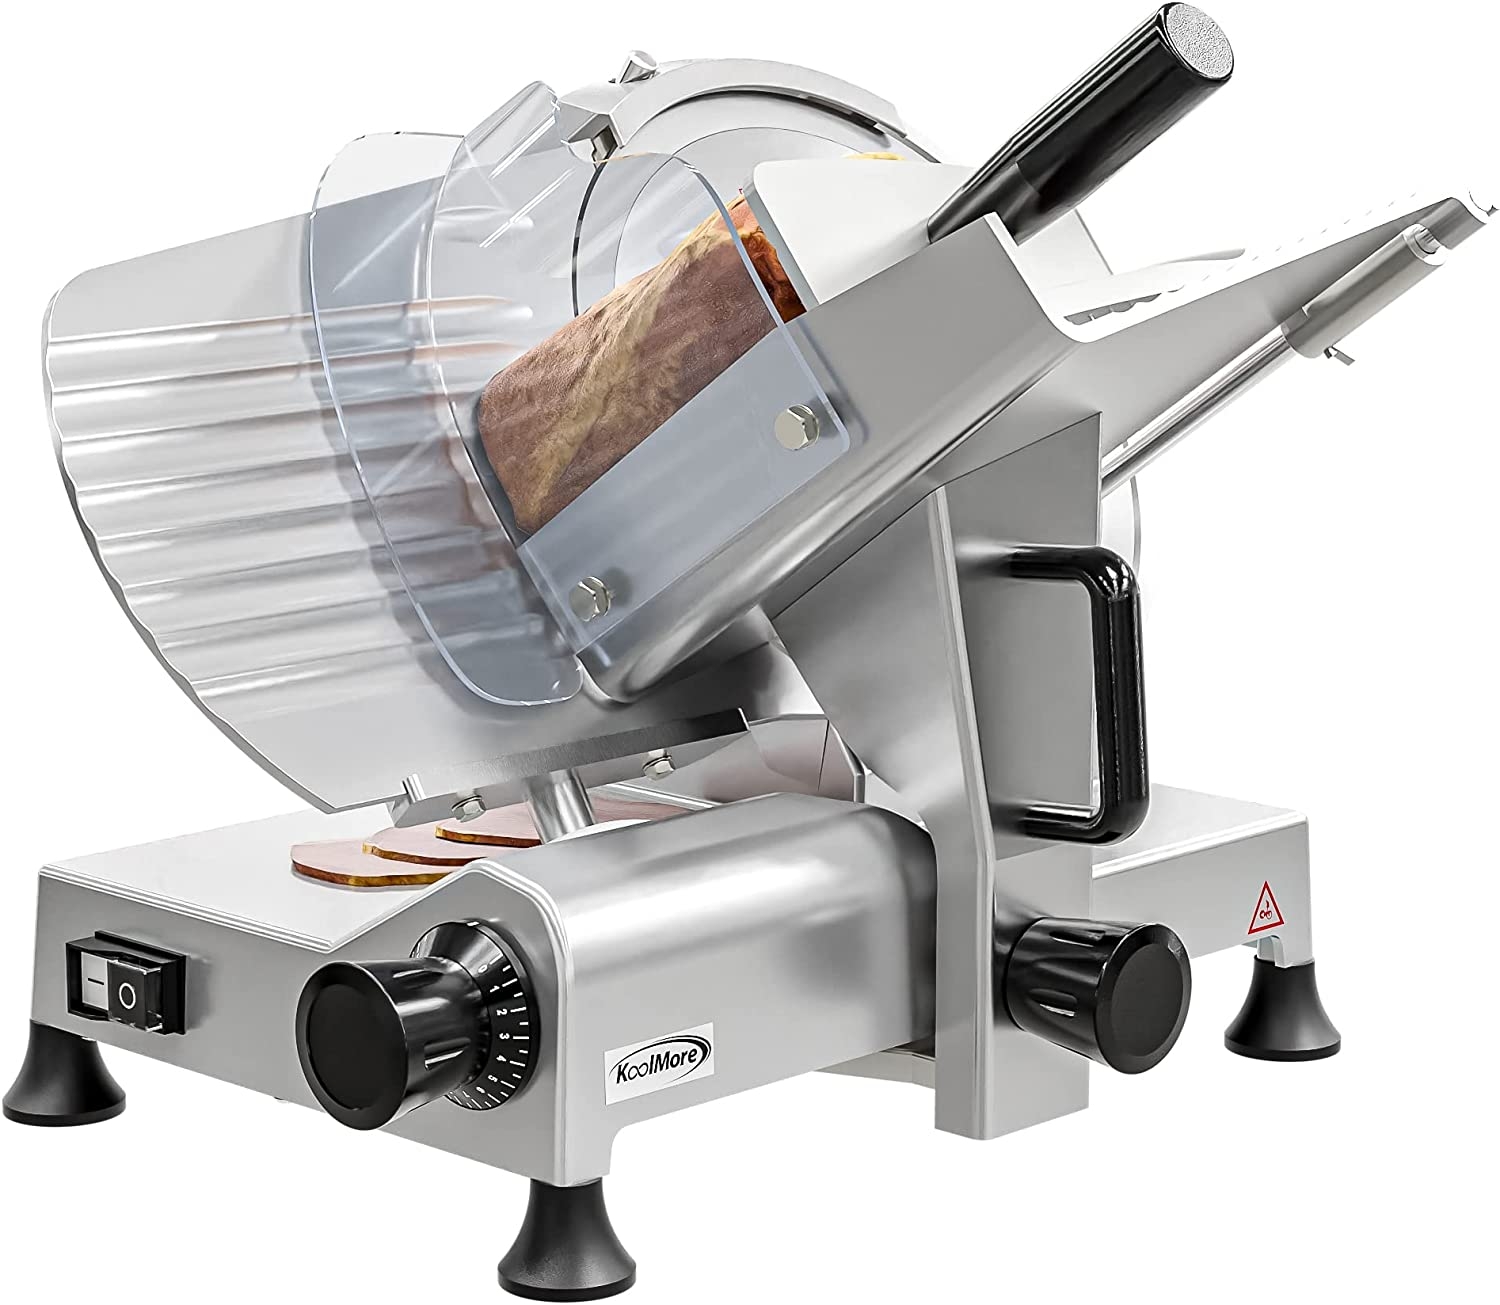 KoolMore Commercial Deli Meat Slicer with 10” Carbon Steel Blade for Cutting and Slicing Food, Ham, Veggies, and Cheese,